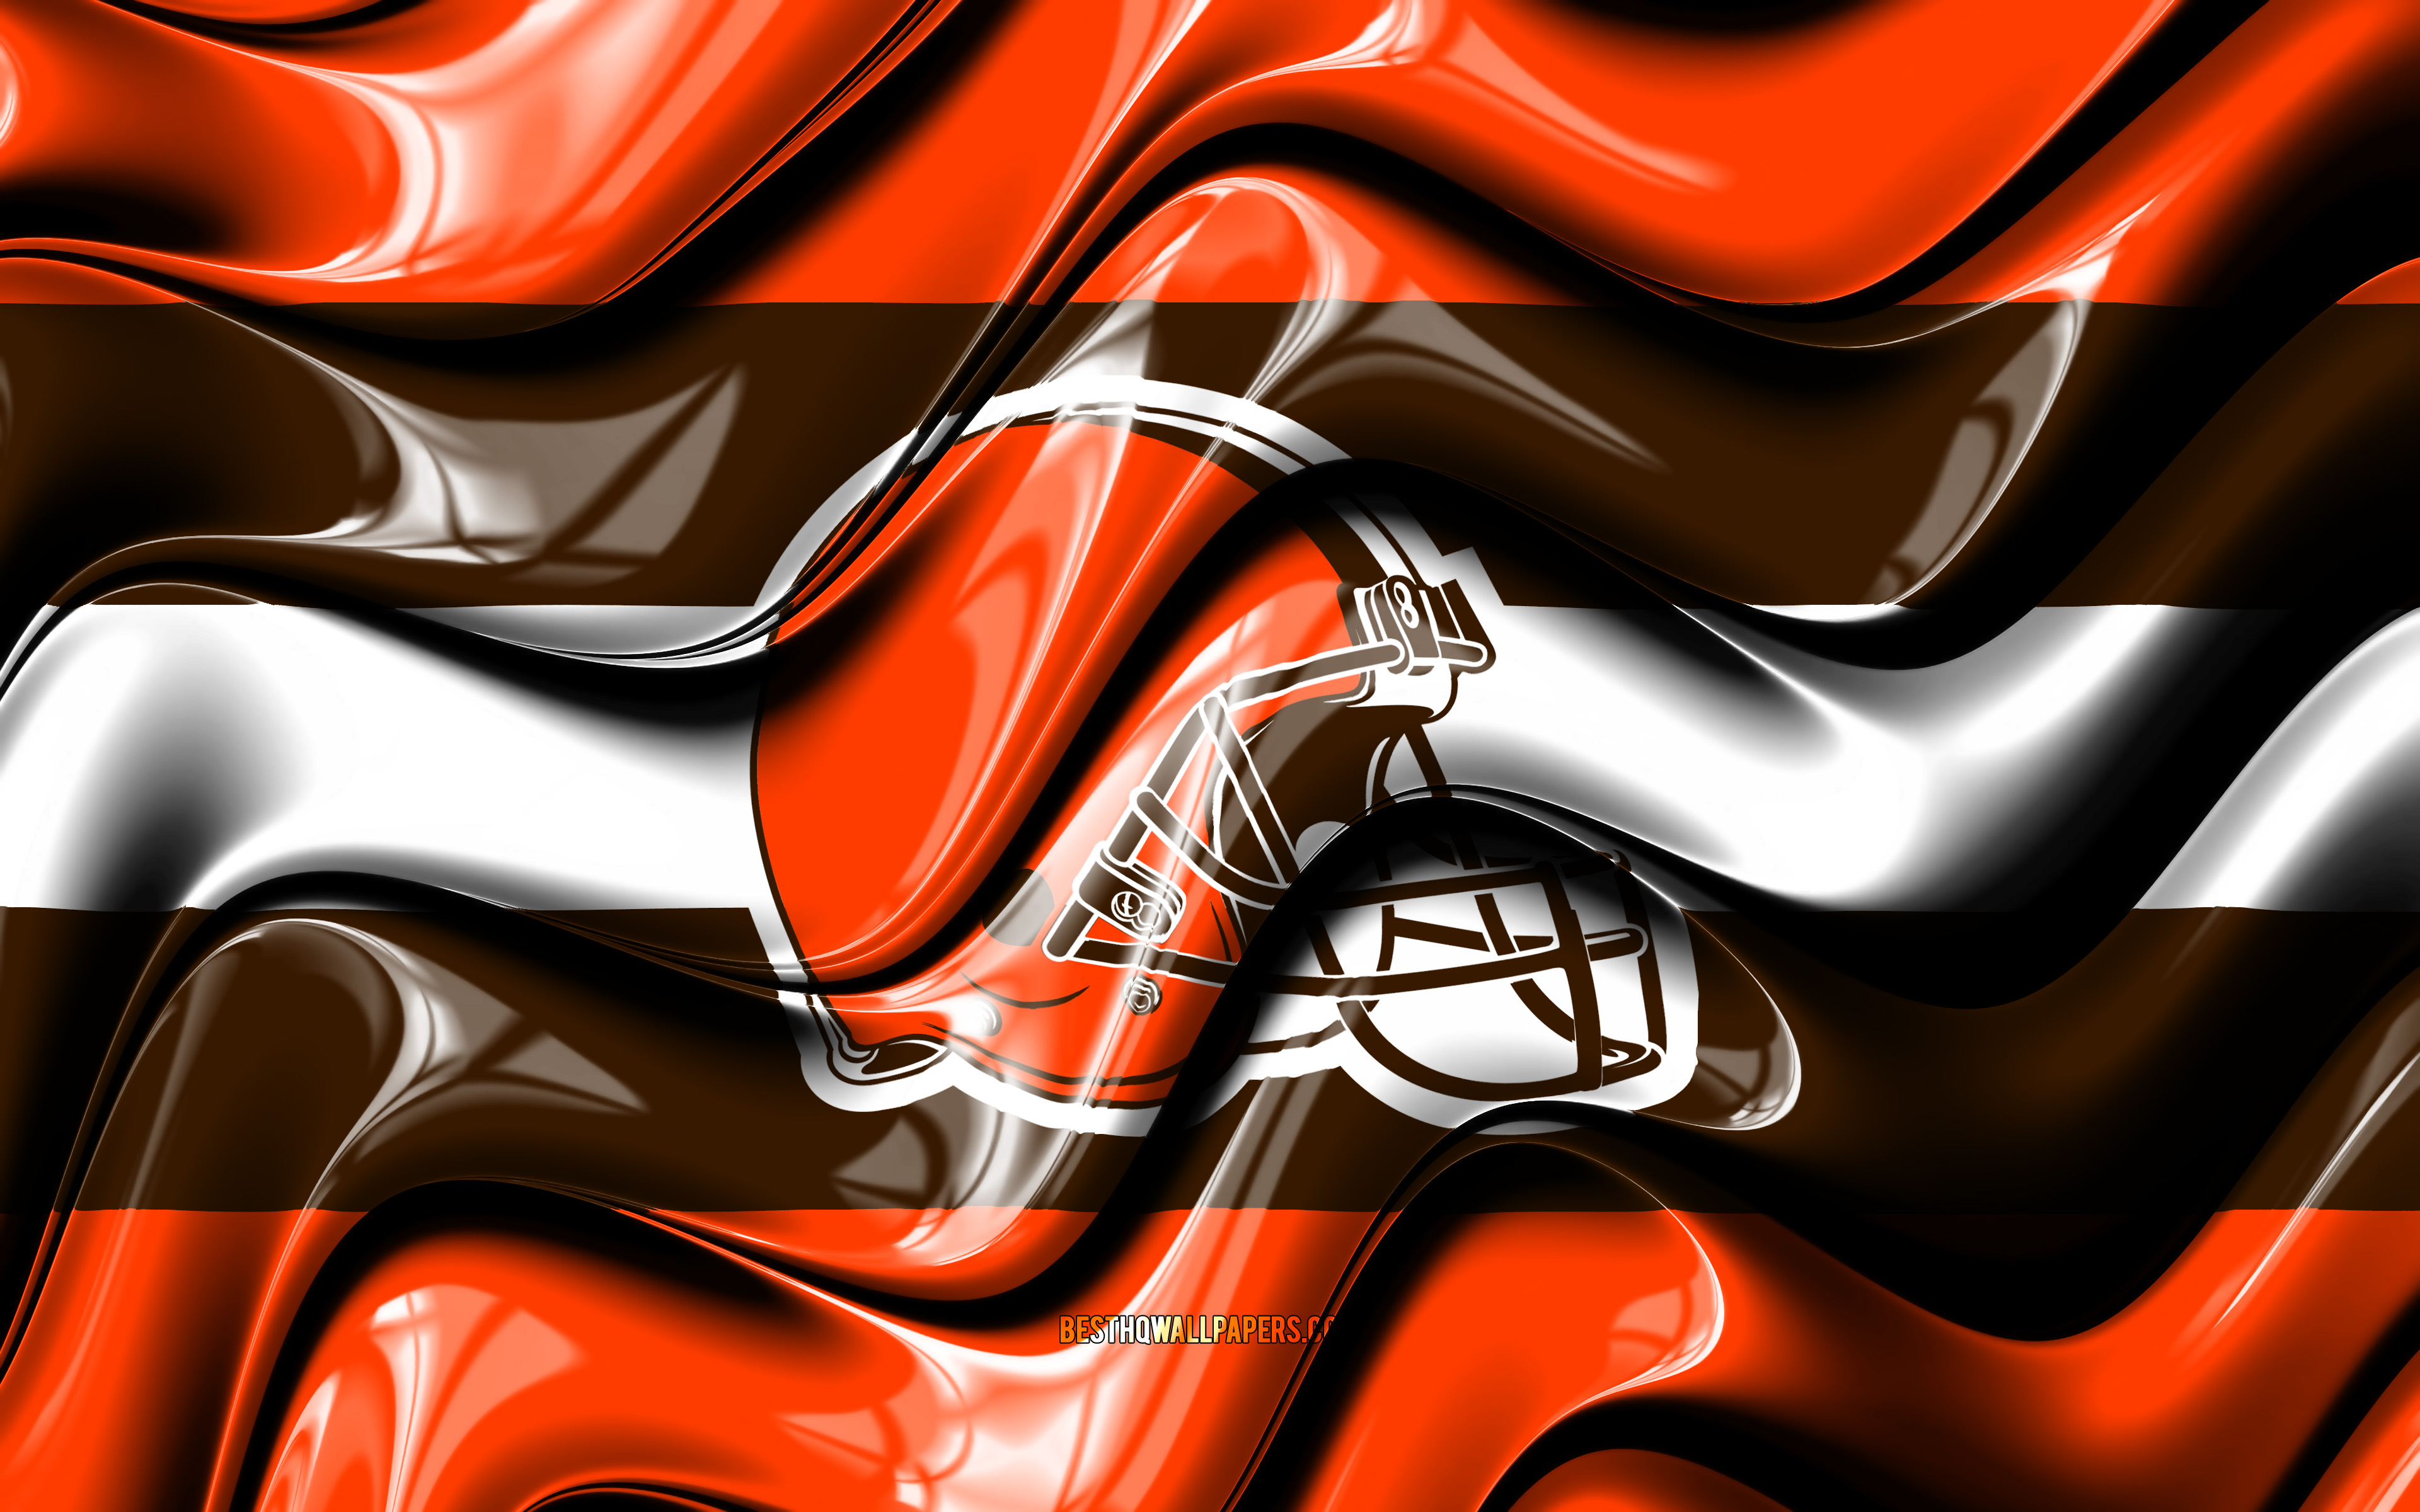 Download wallpapers Cleveland Browns flag, 4k, orange and brown 3D ...